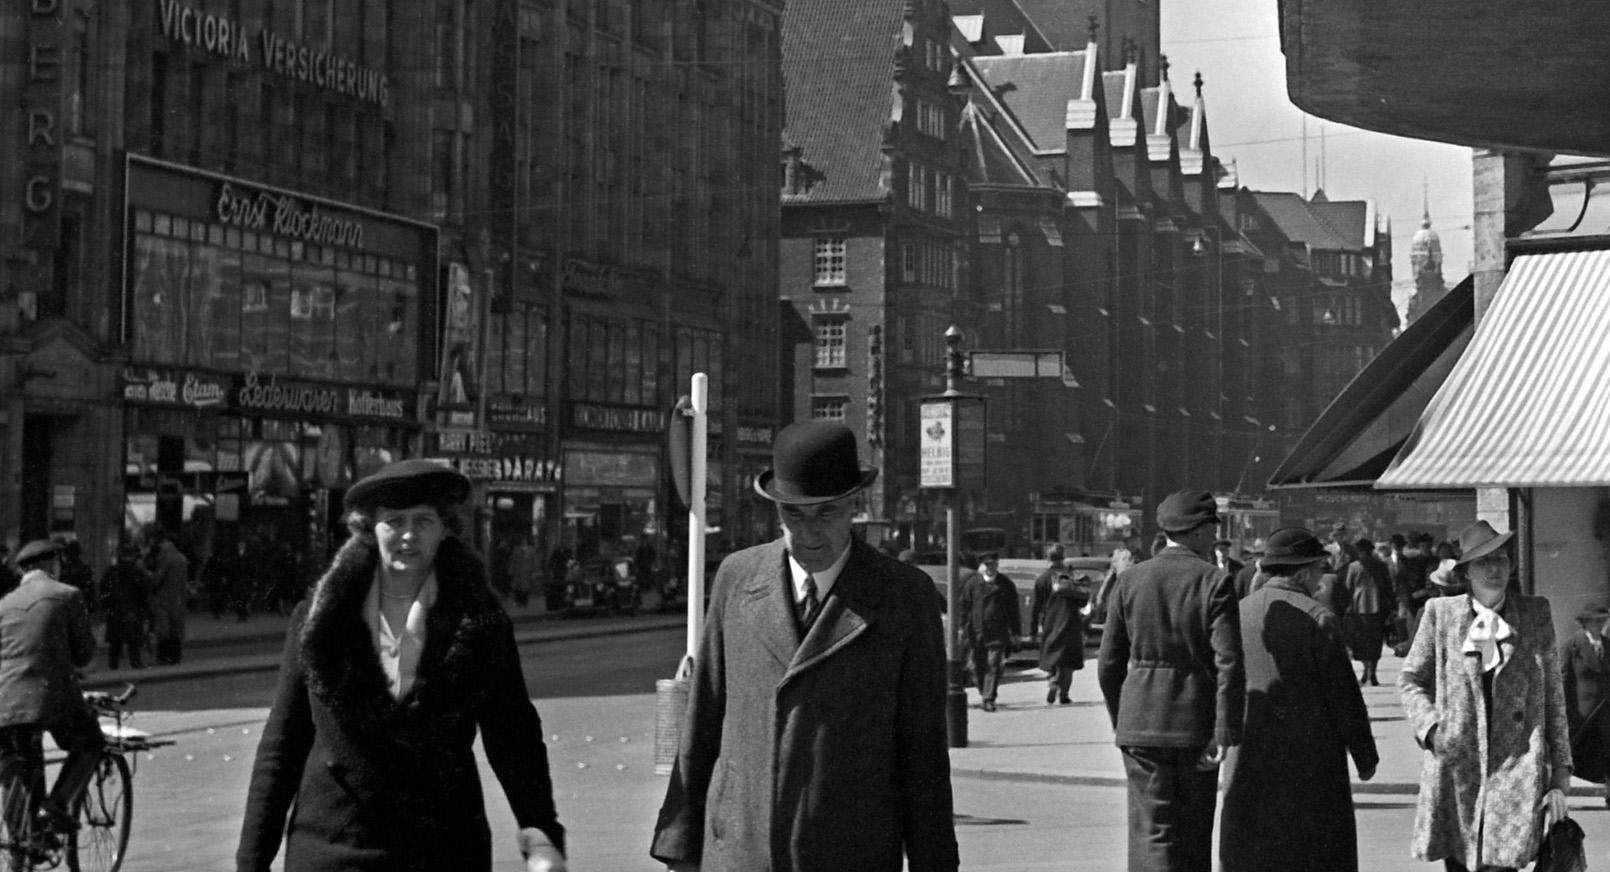 Moenckebergstrasse at Hamburg with passers by, Germany 1938 Printed Later  - Photograph by Karl Heinrich Lämmel